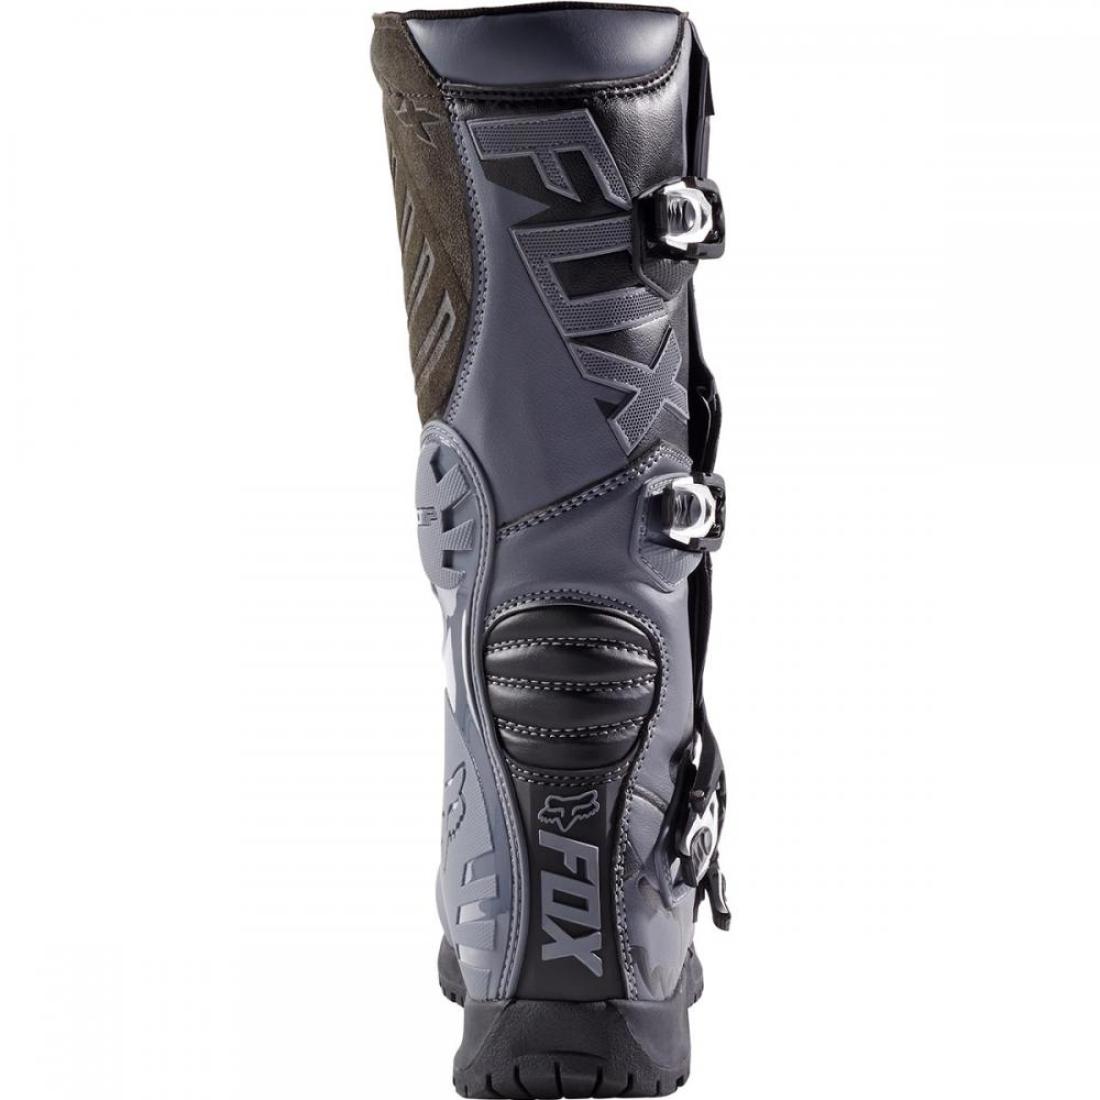 Comp 5 Offroad Boot Black/Grey